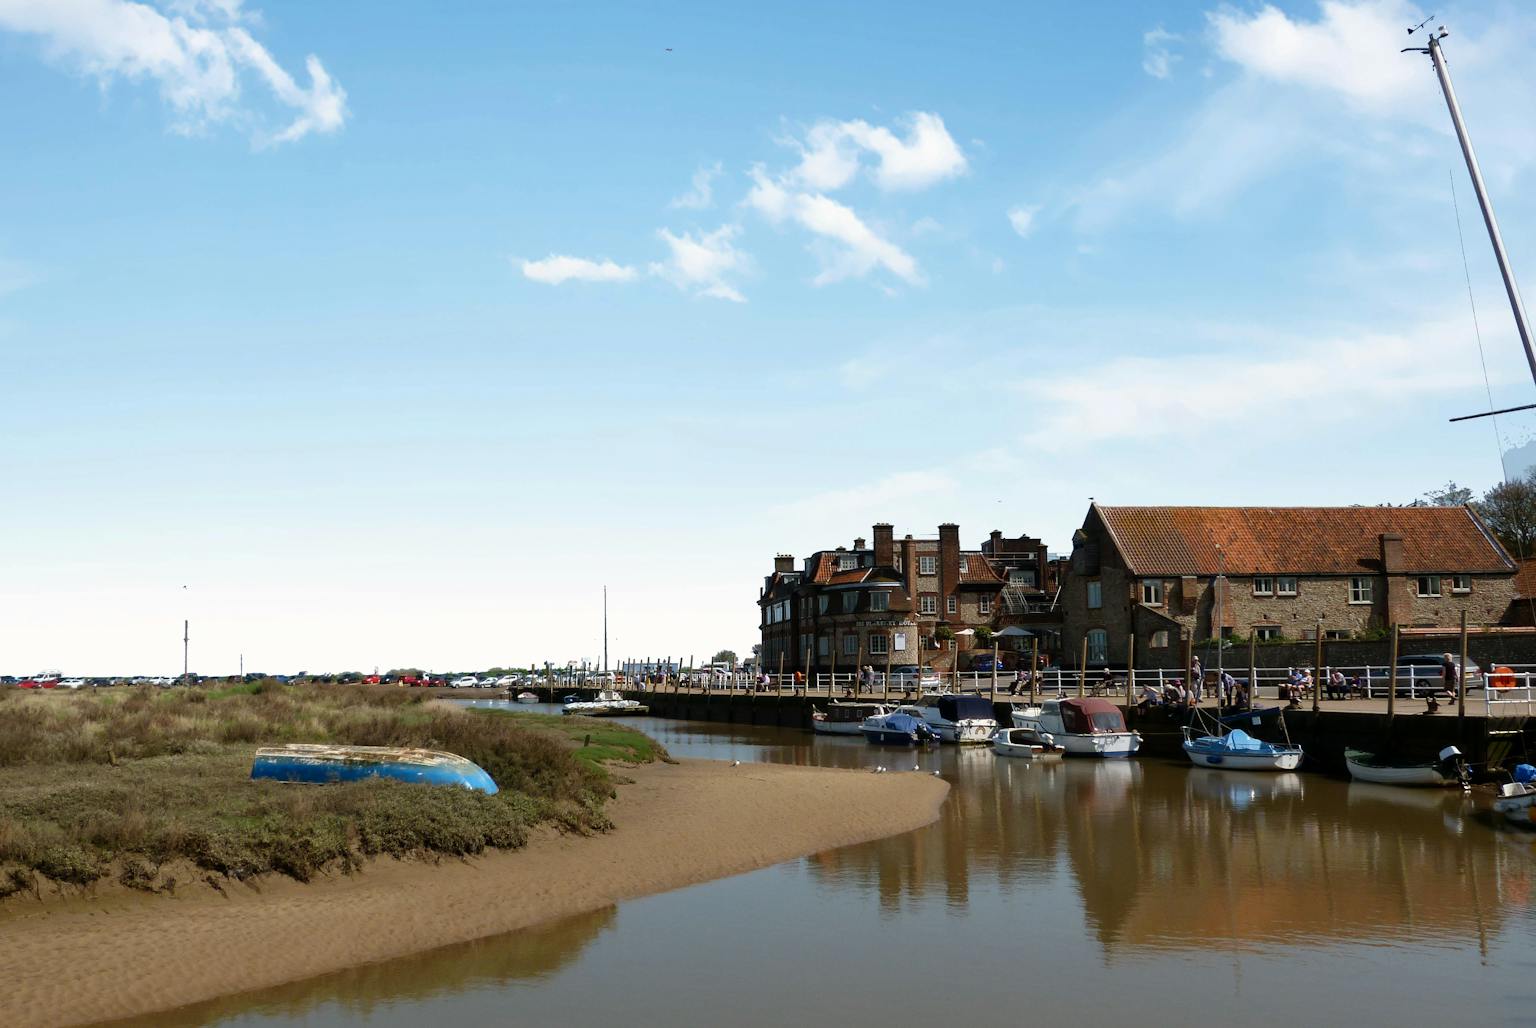 A view of a North Norfolk Conservation Area, which is receiving heritage consultancy guidance